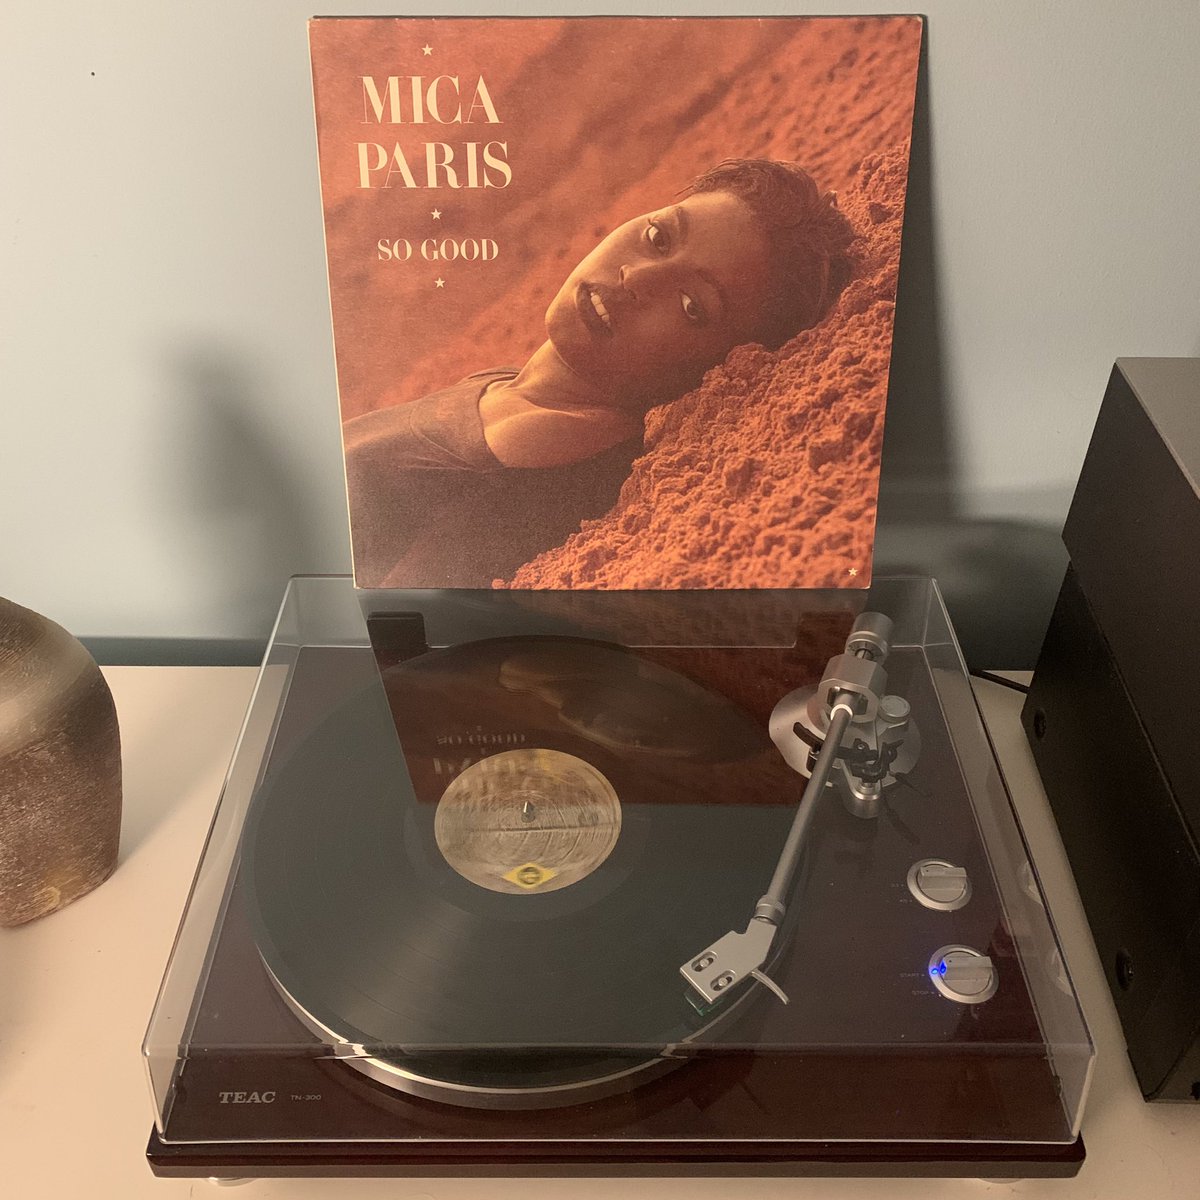 Now playing So Good - Mica Paris (1988) @MicaParisSoul One of the first albums that I bought on cd. Found a vinyl copy on Sunday at @BarrasGlasgow